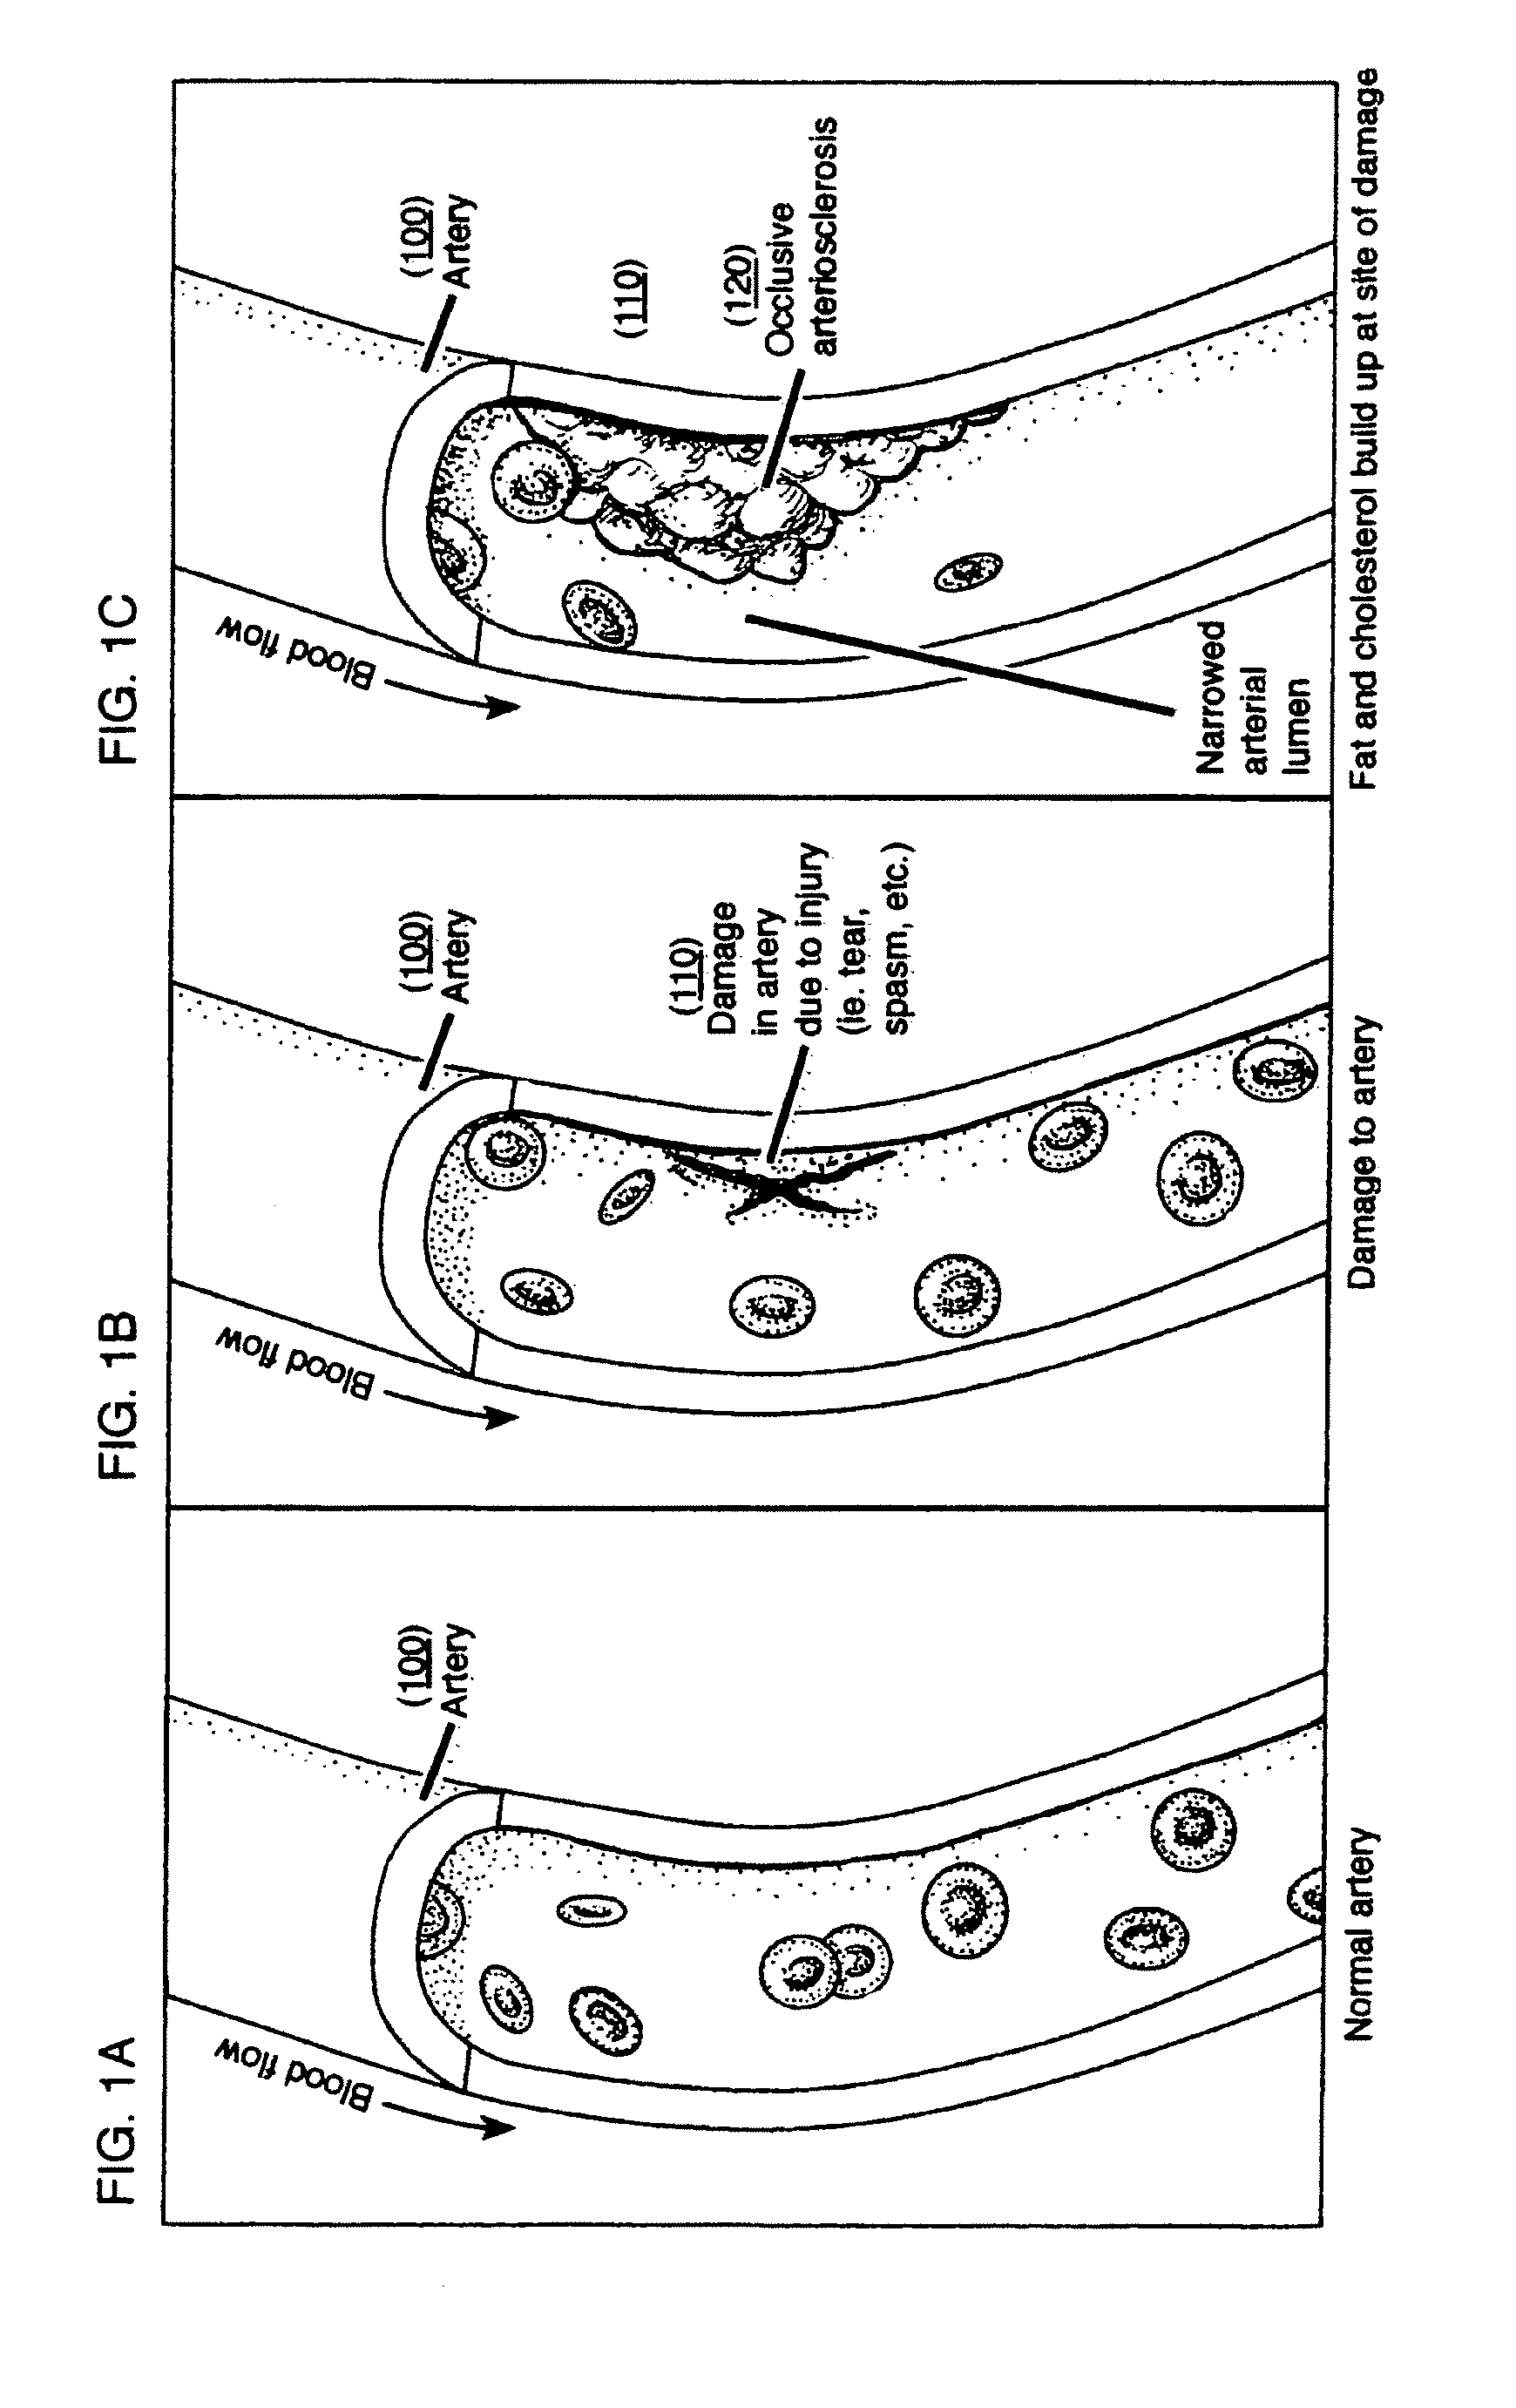 Methods and compositions to treat myocardial conditions